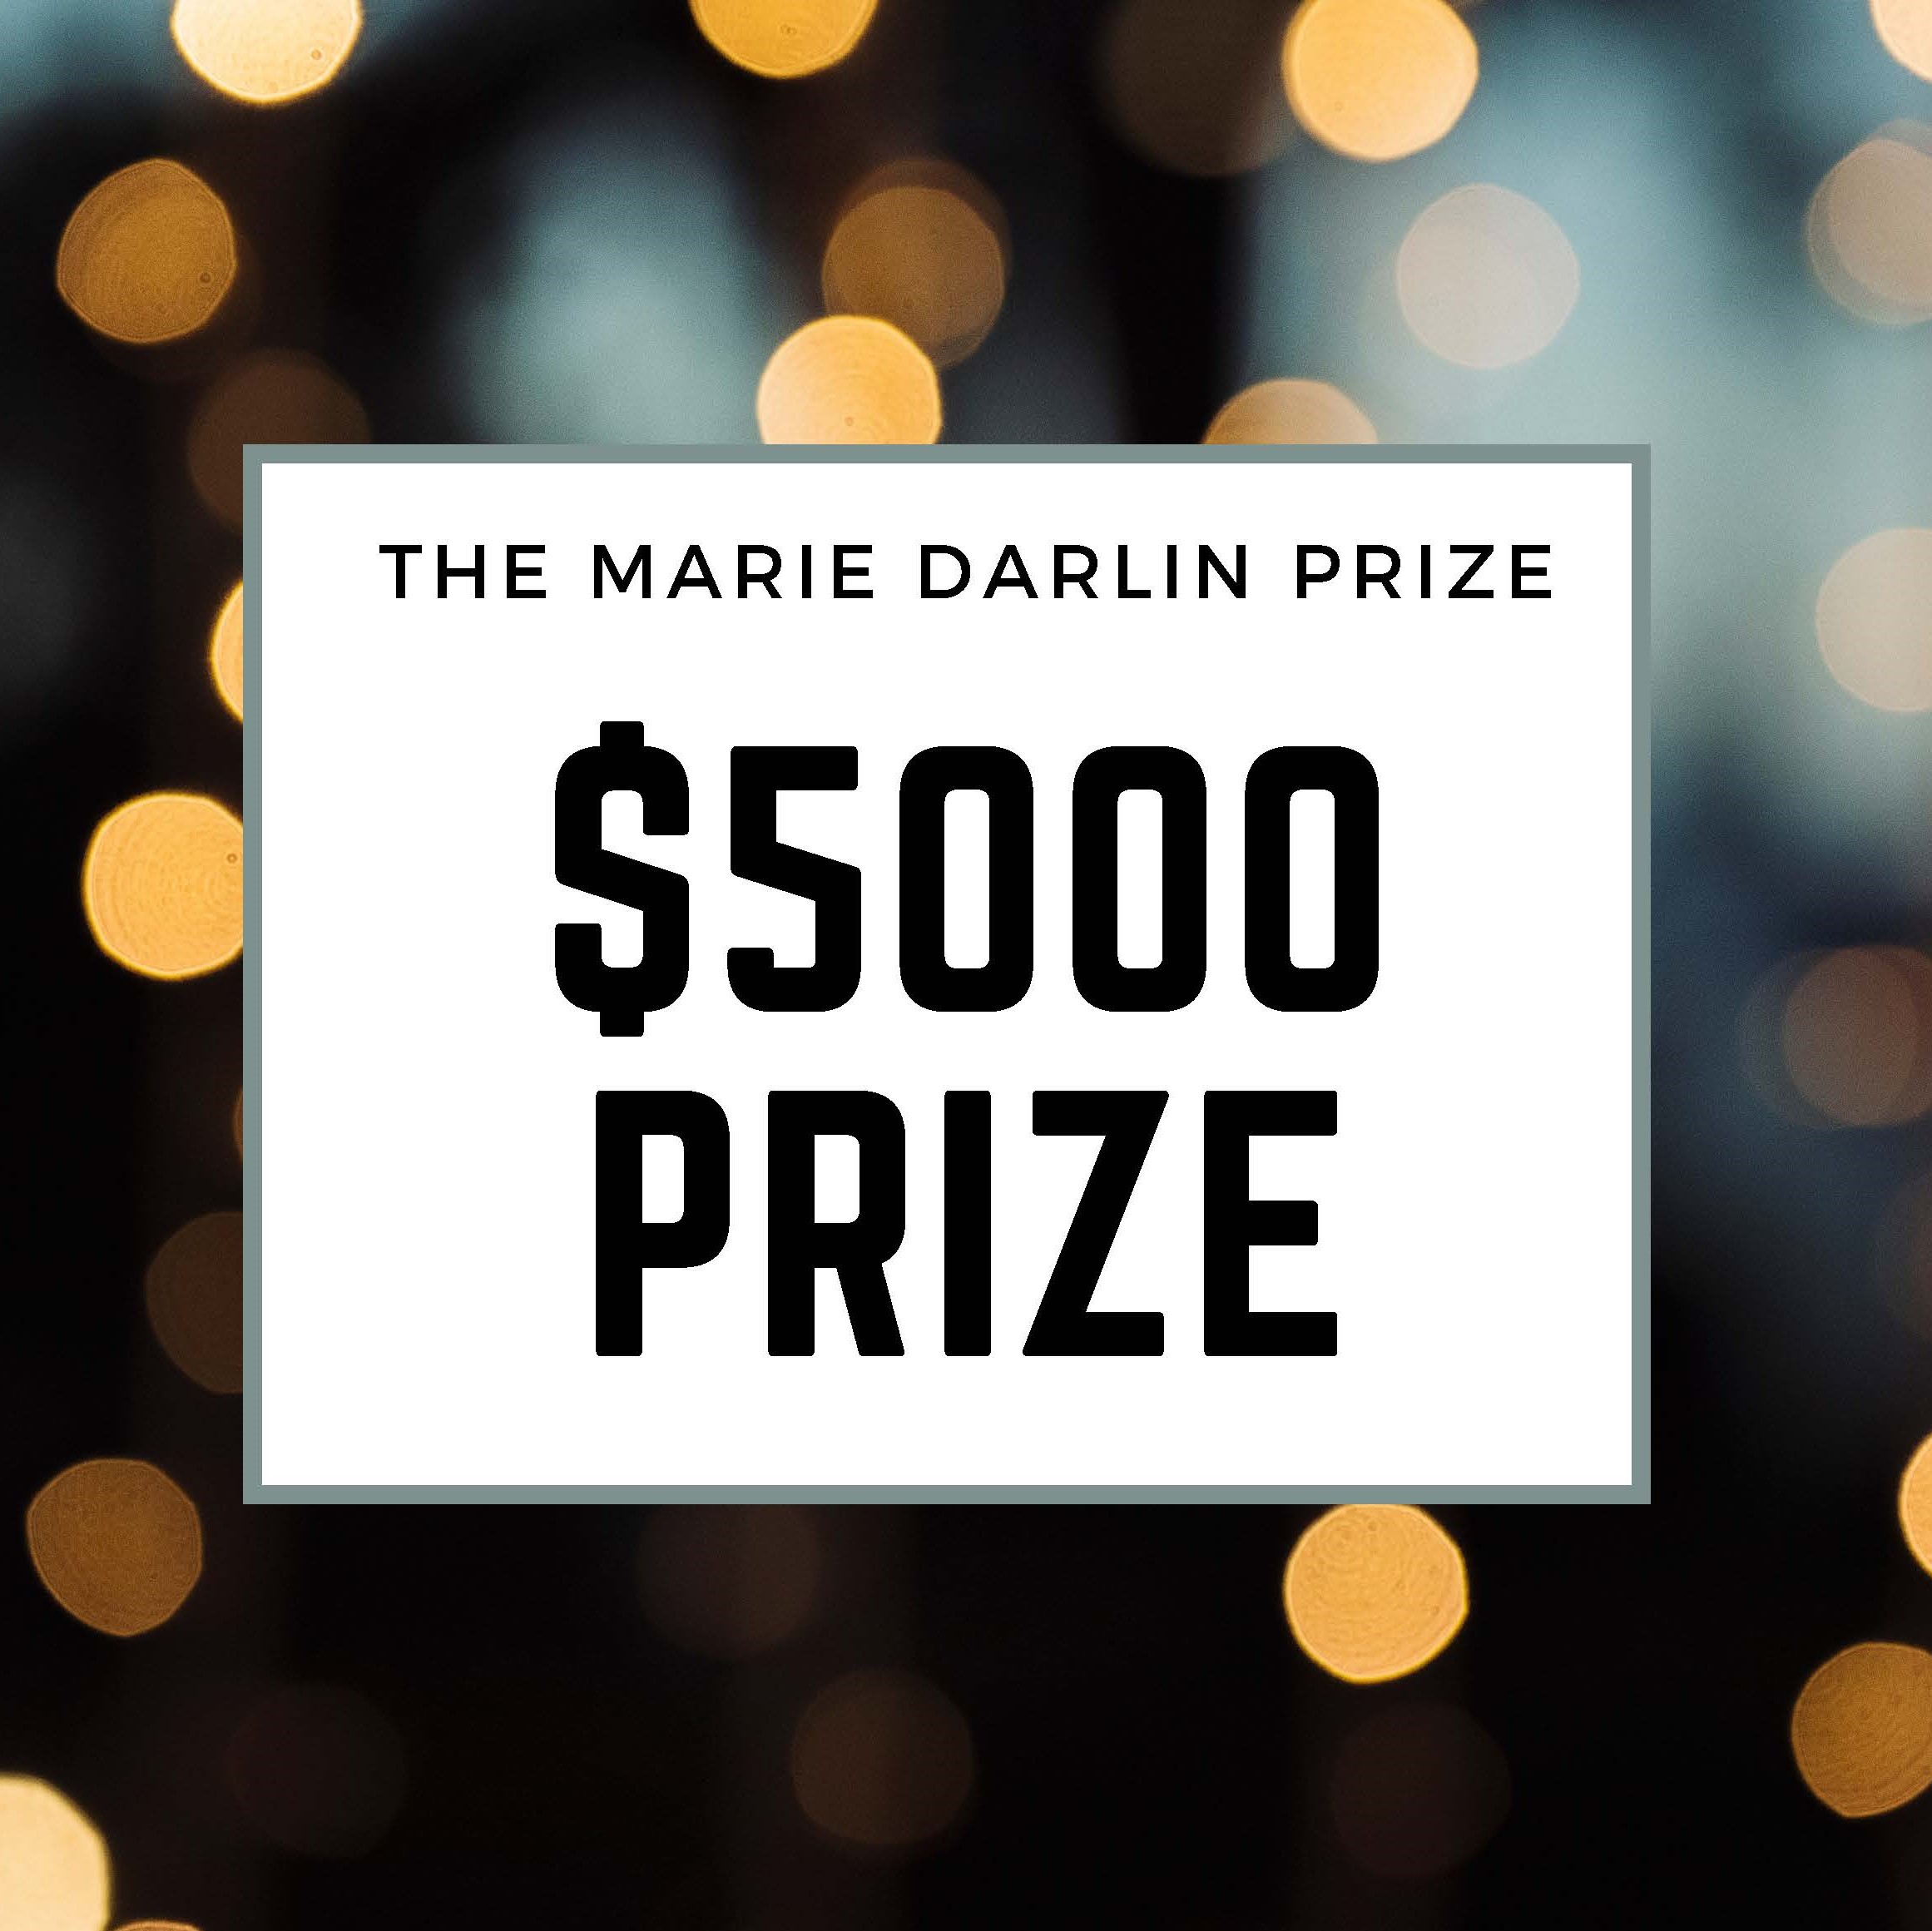 The Marie Darlin Prize